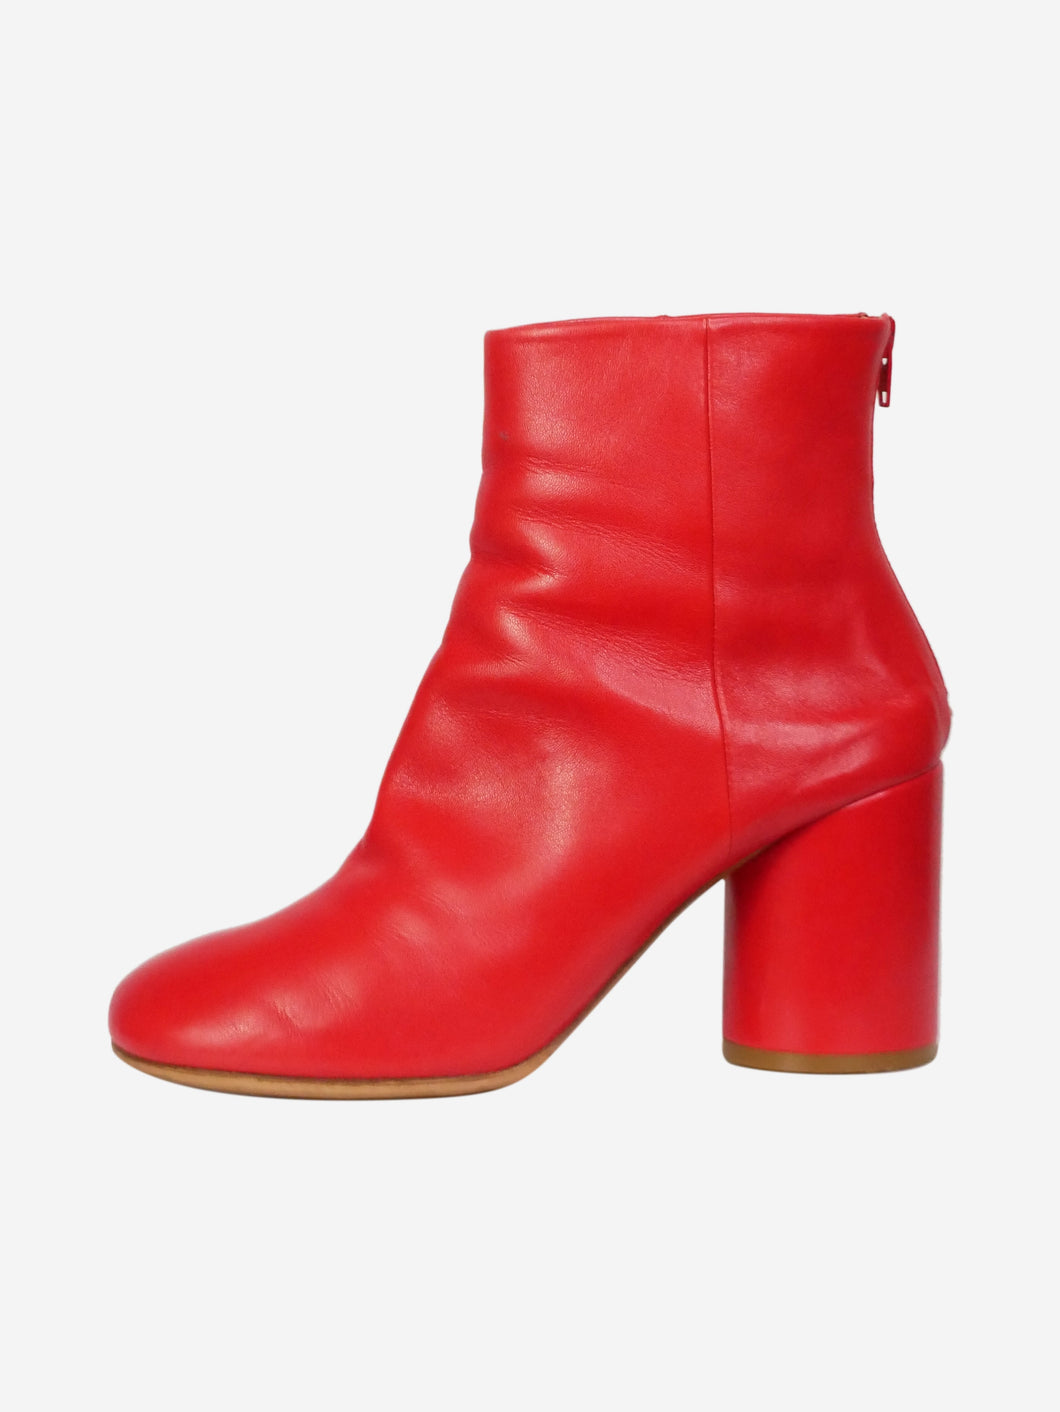 Red leather ankle boots - size EU 39 Boots Maison Margiela 